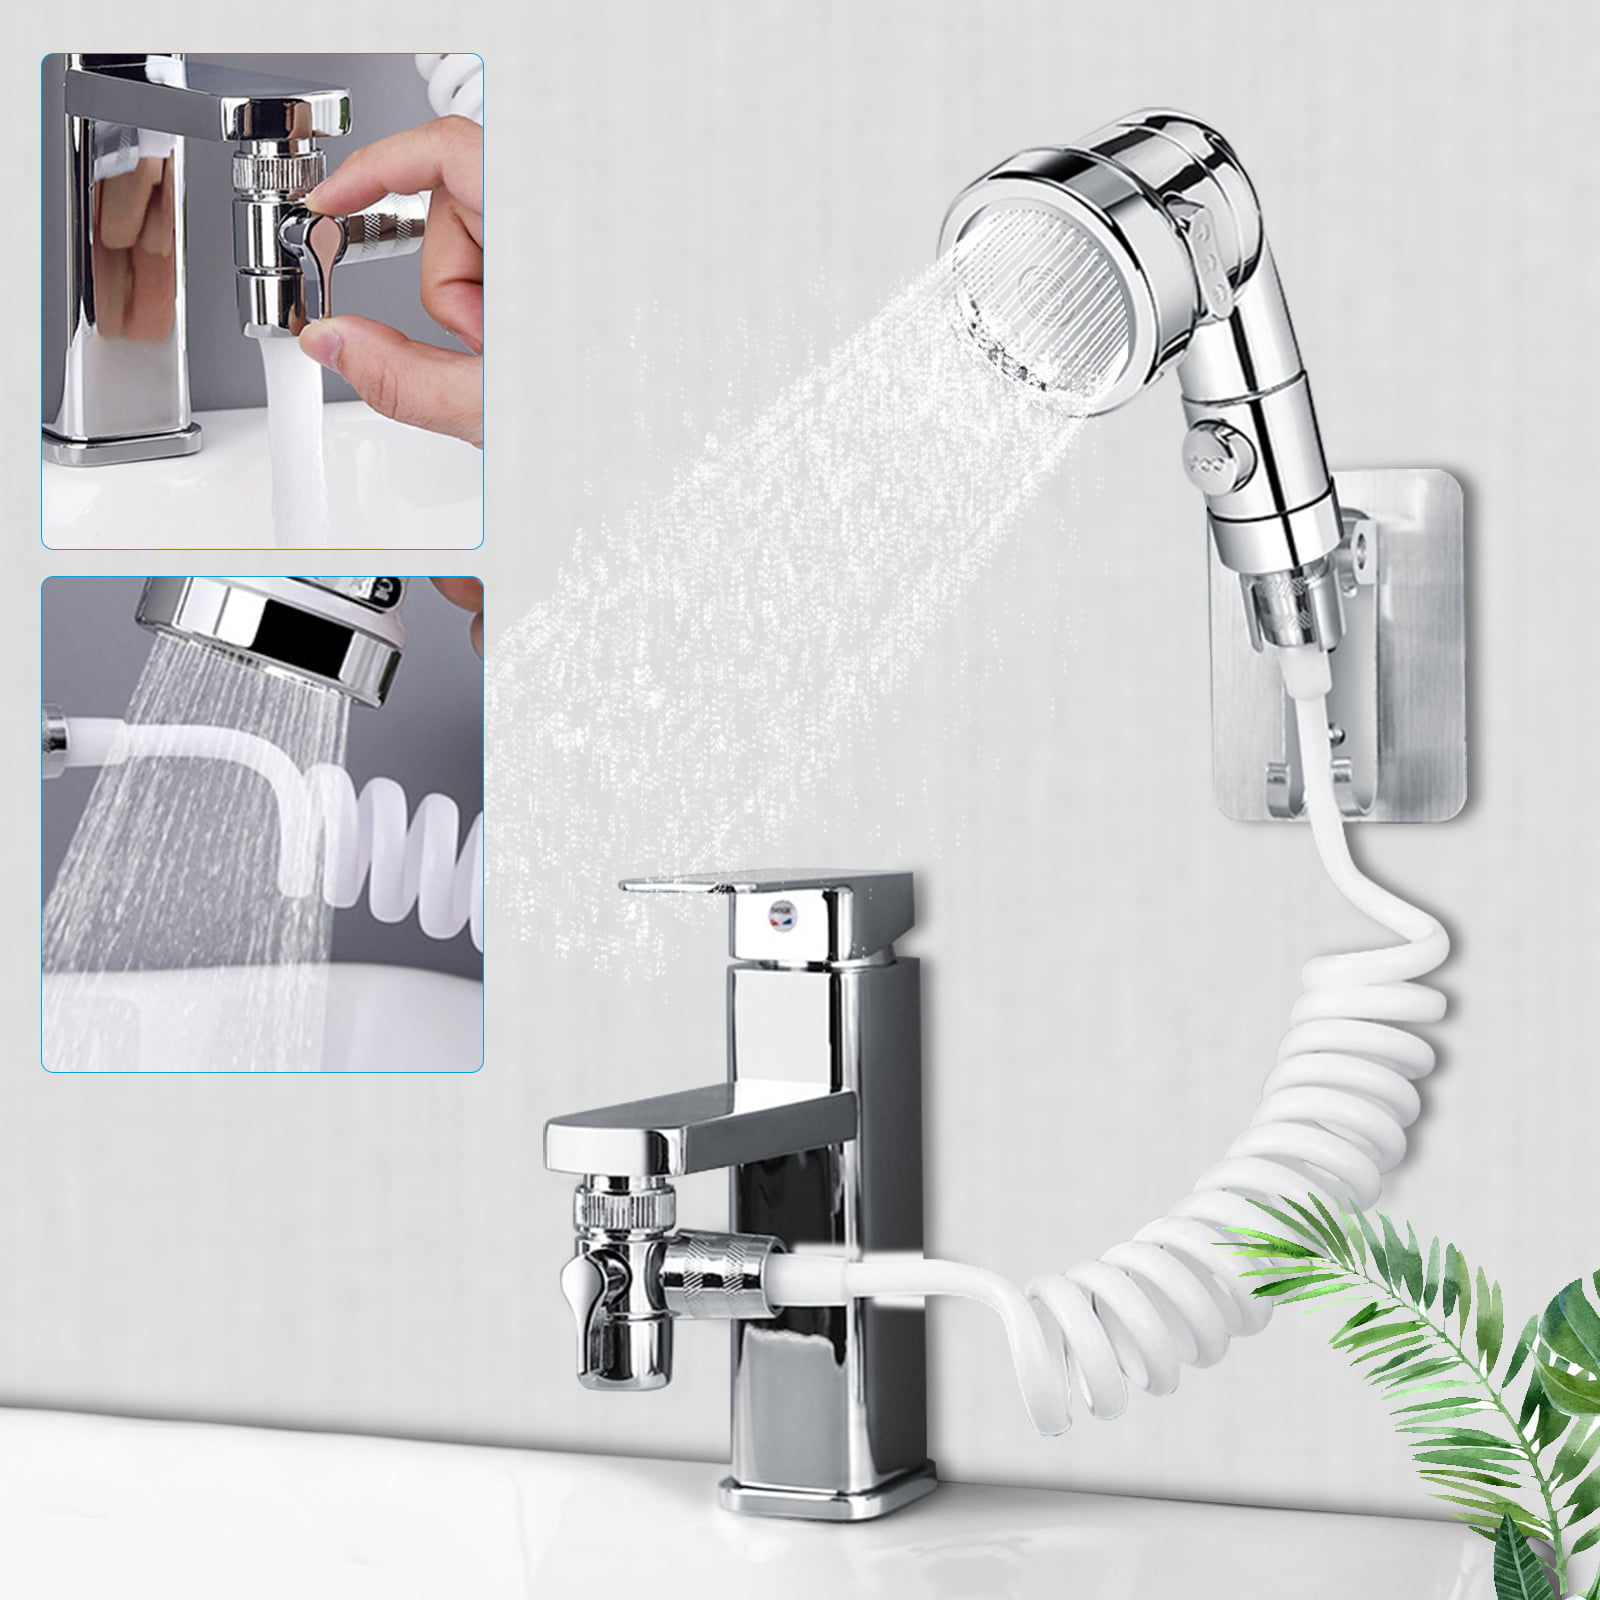 Shower Head Hose Removable Tap Attachment Bathroom Bath Strong Rubber Universal 